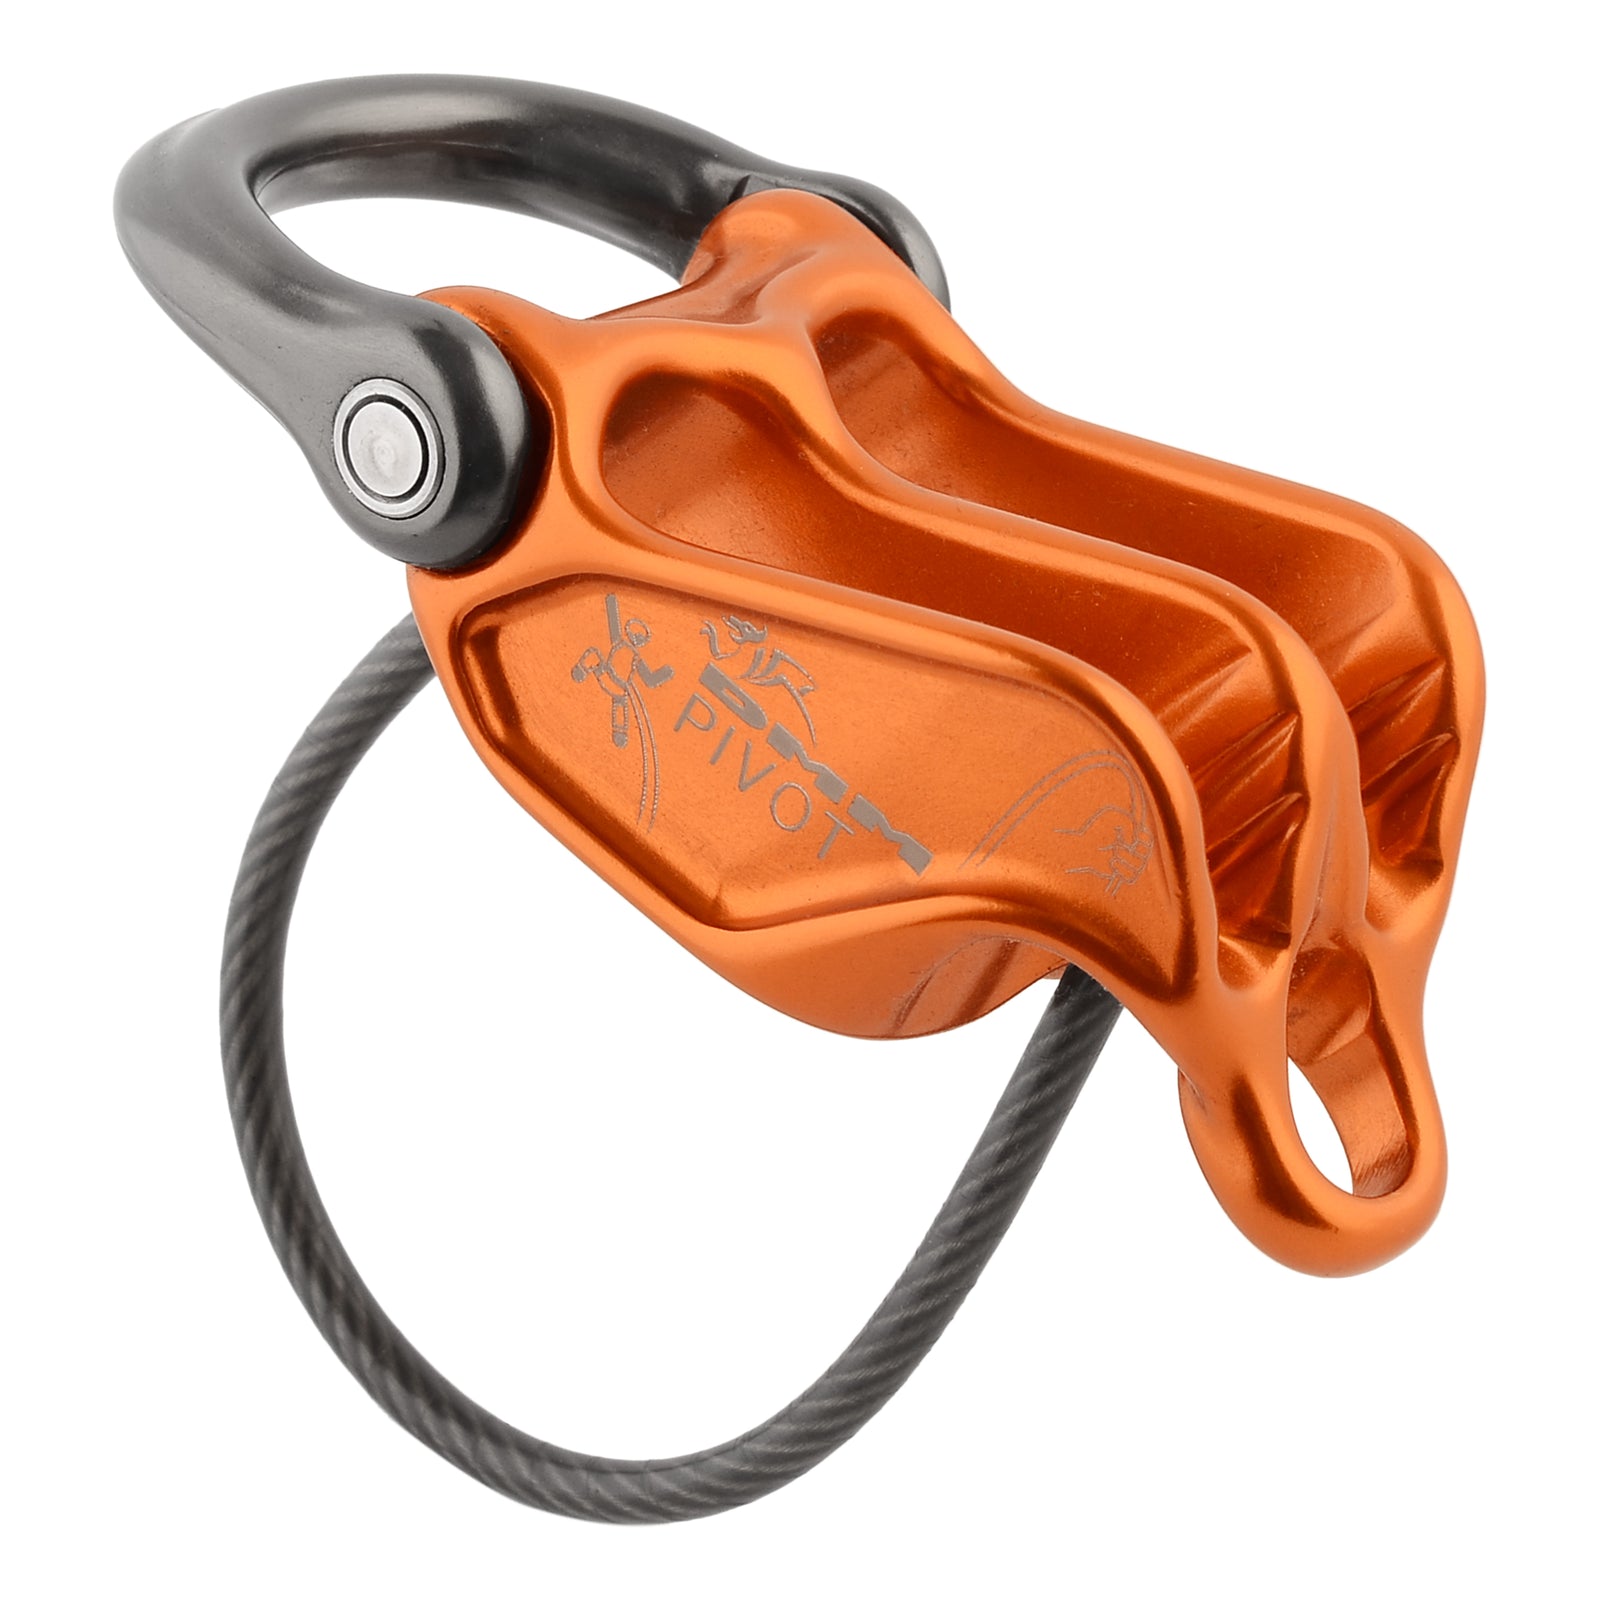 Edelrid Ohm - Belay device, Free EU Delivery